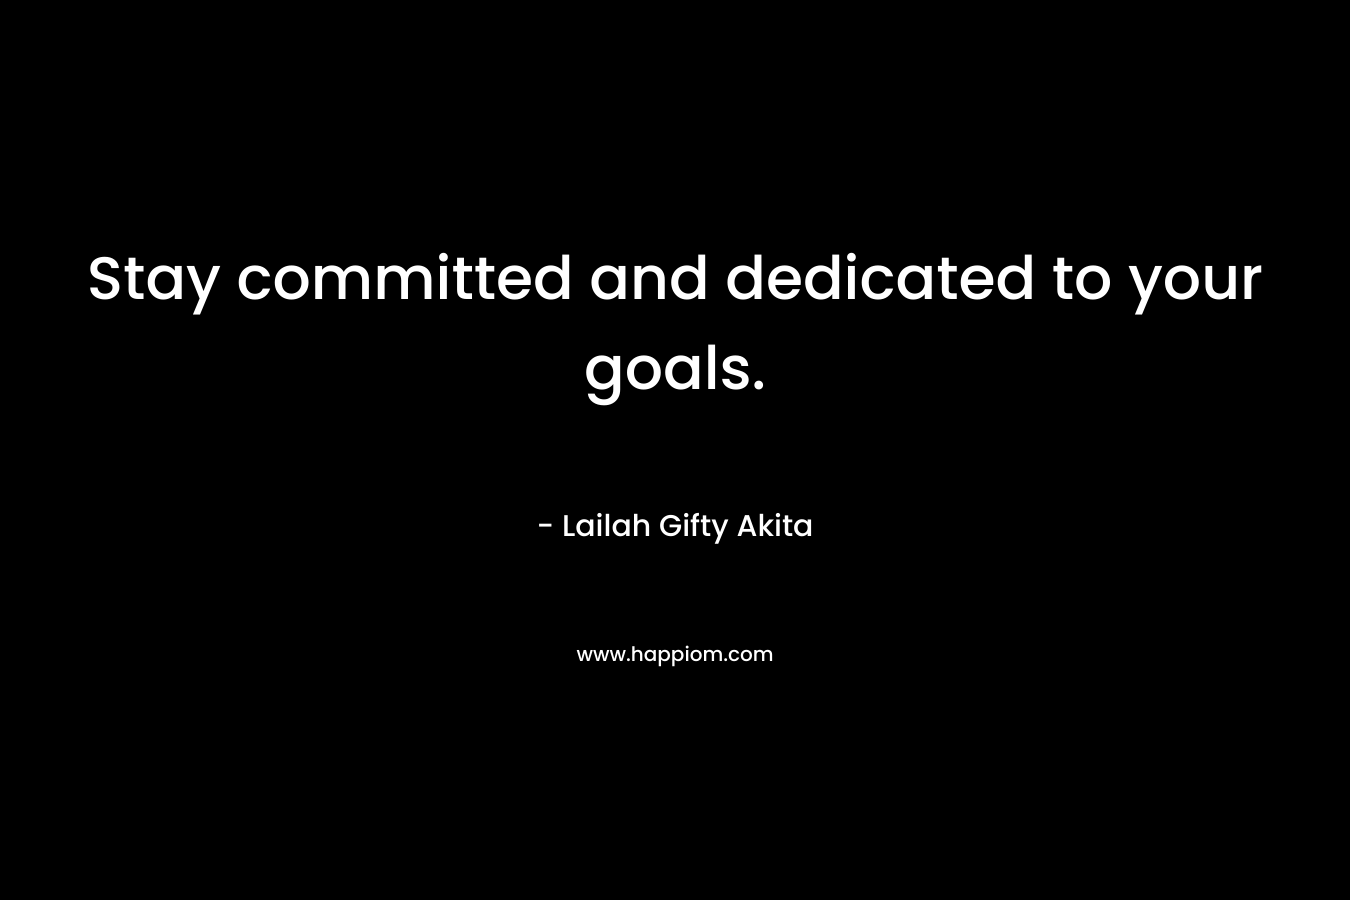 Stay committed and dedicated to your goals. – Lailah Gifty Akita